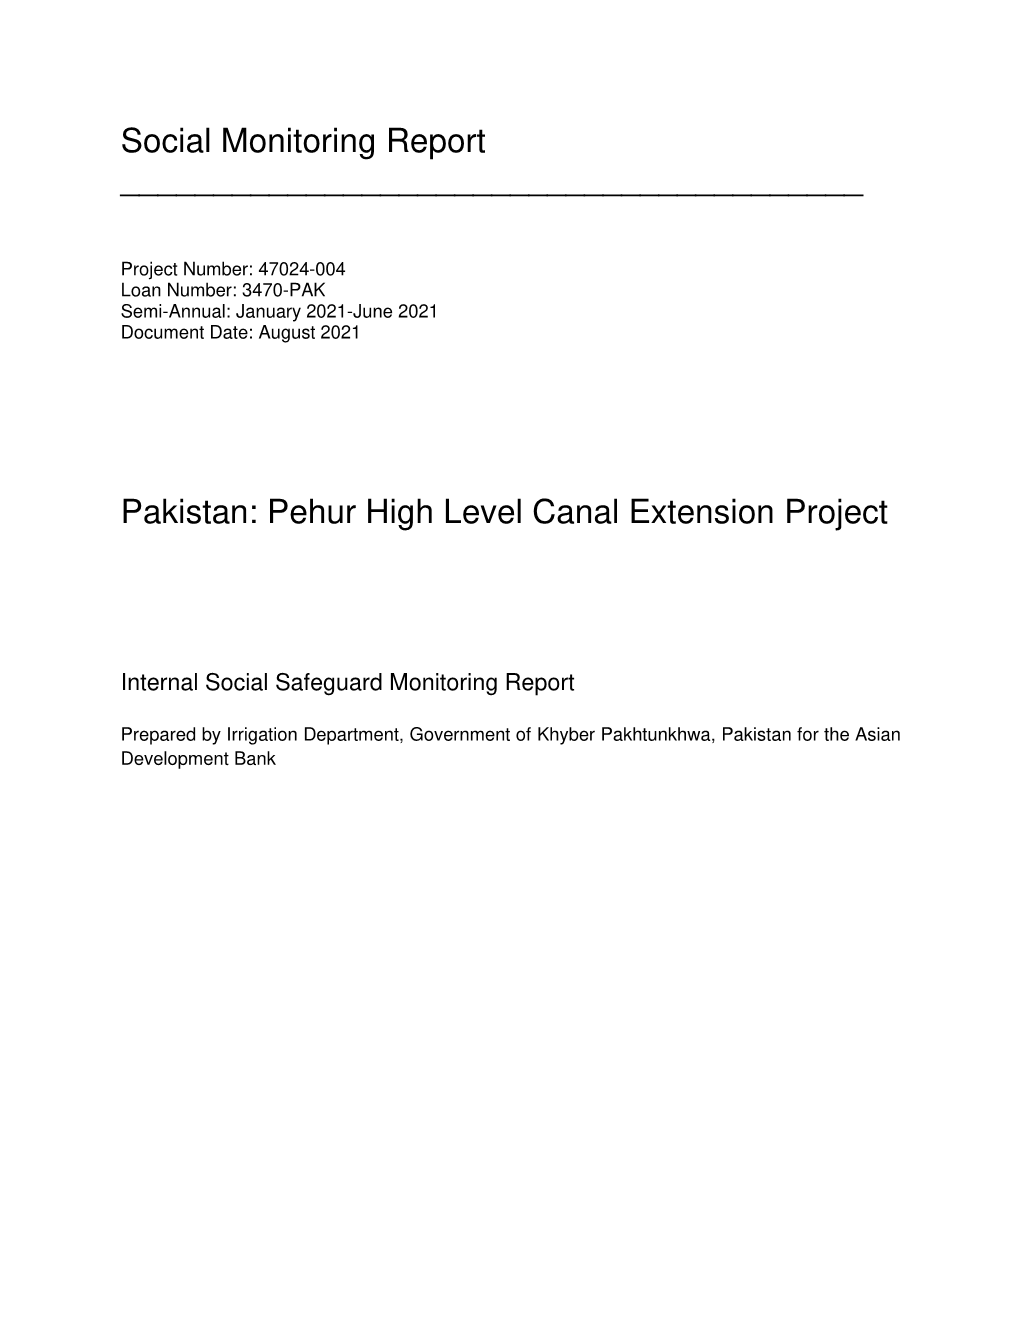 Pehur High Level Canal Extension Project: Social Monitoring Report